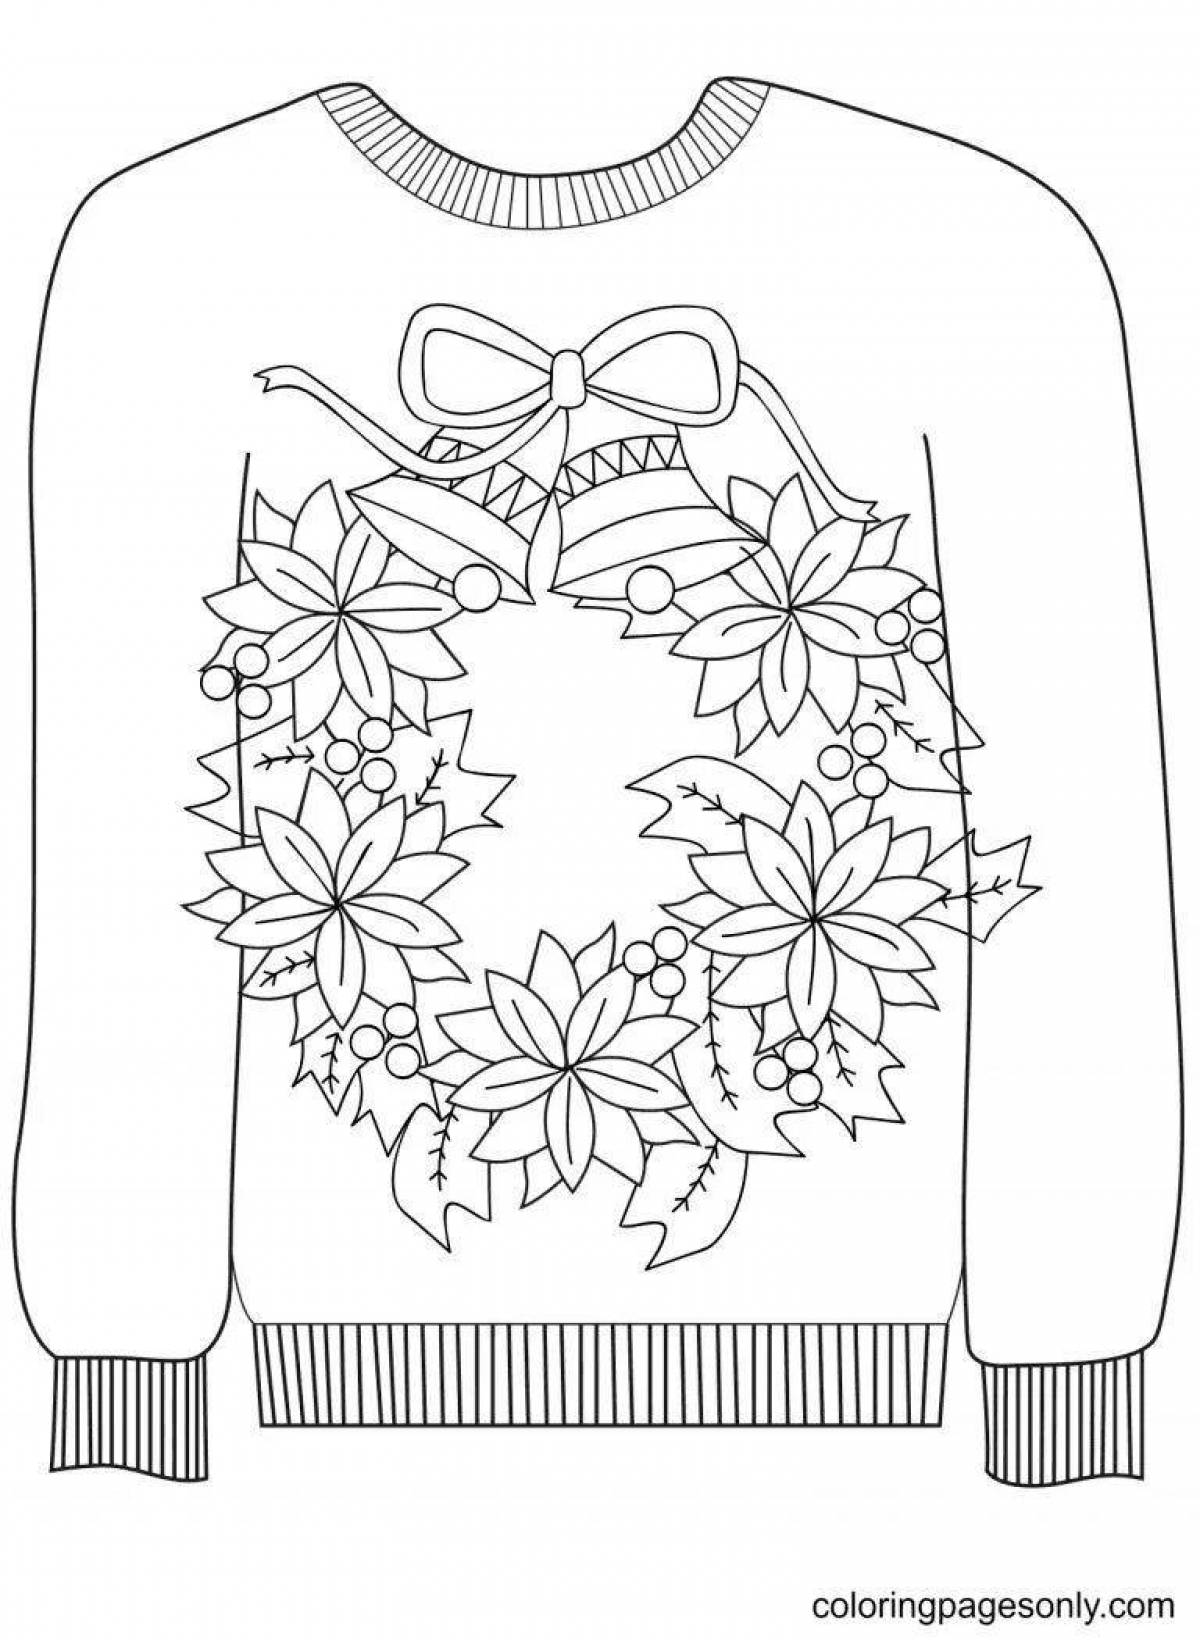 Coloring sweater for kids